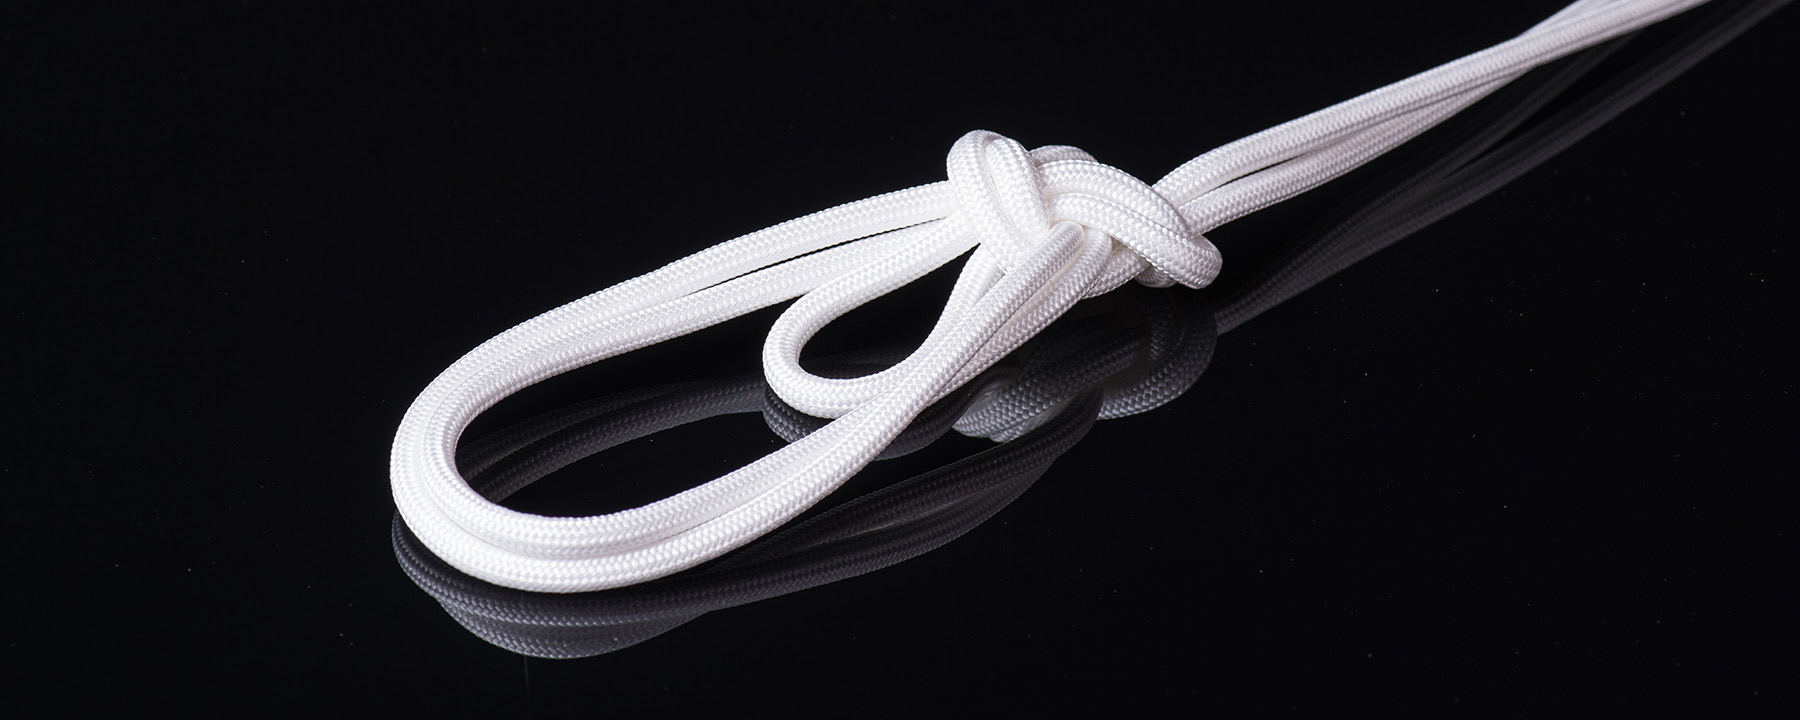 Dyneema® cord 5.5 - Cousin Trestec - Rope Manufacturer for Industry and  Sports